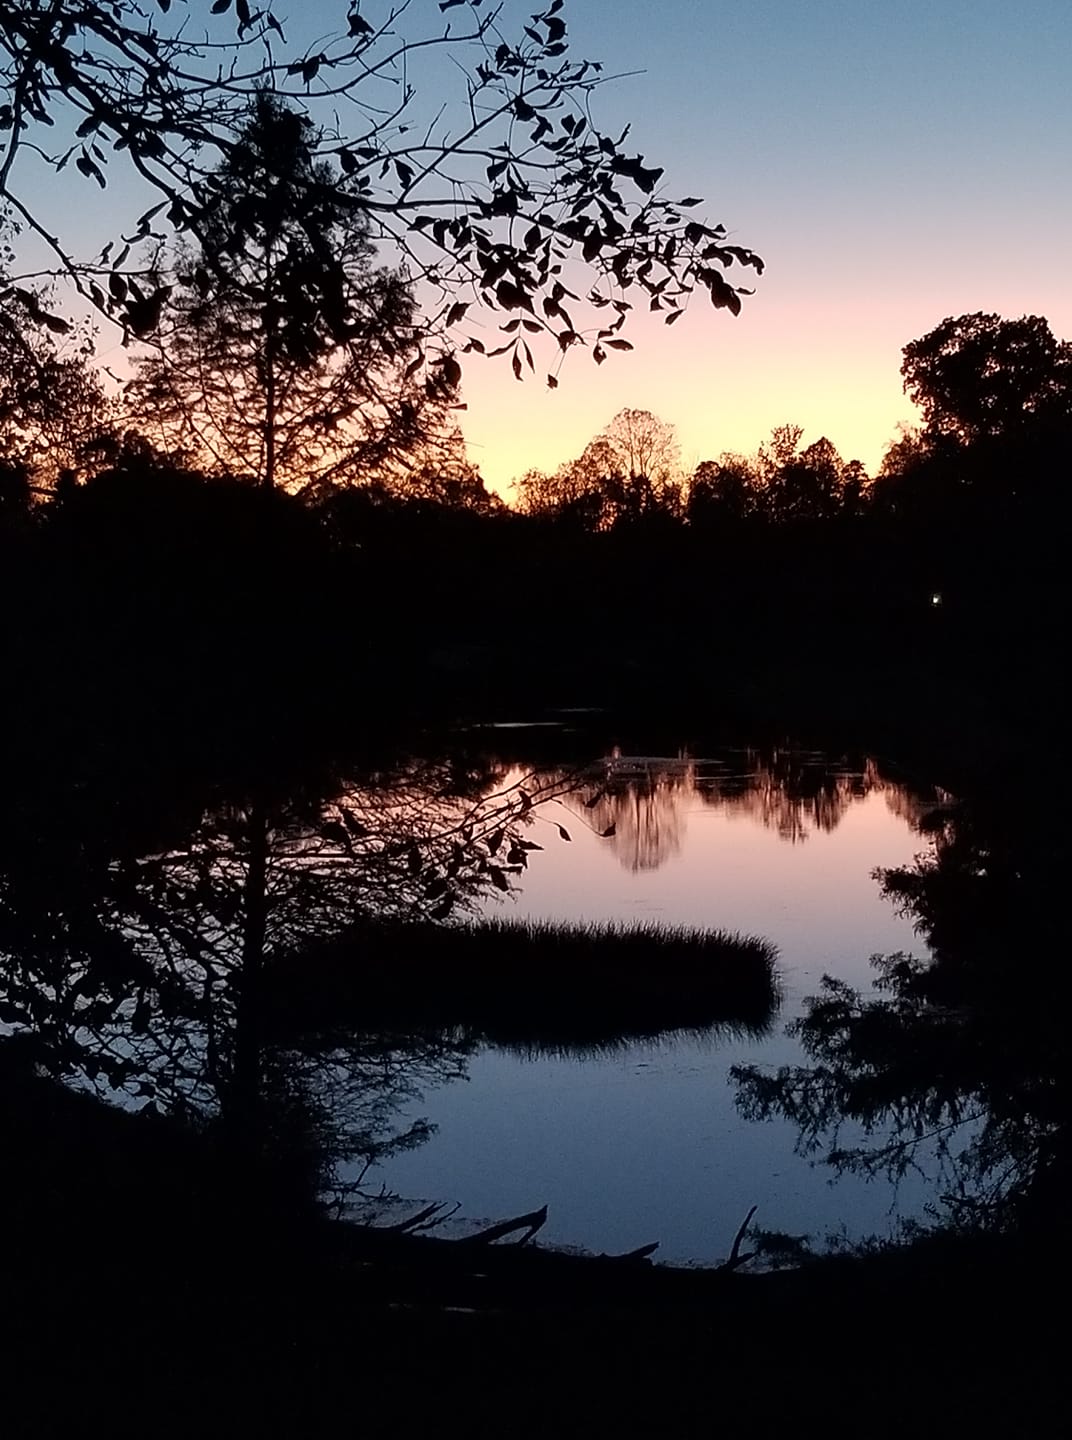 Sunset reflecting in the lower pond